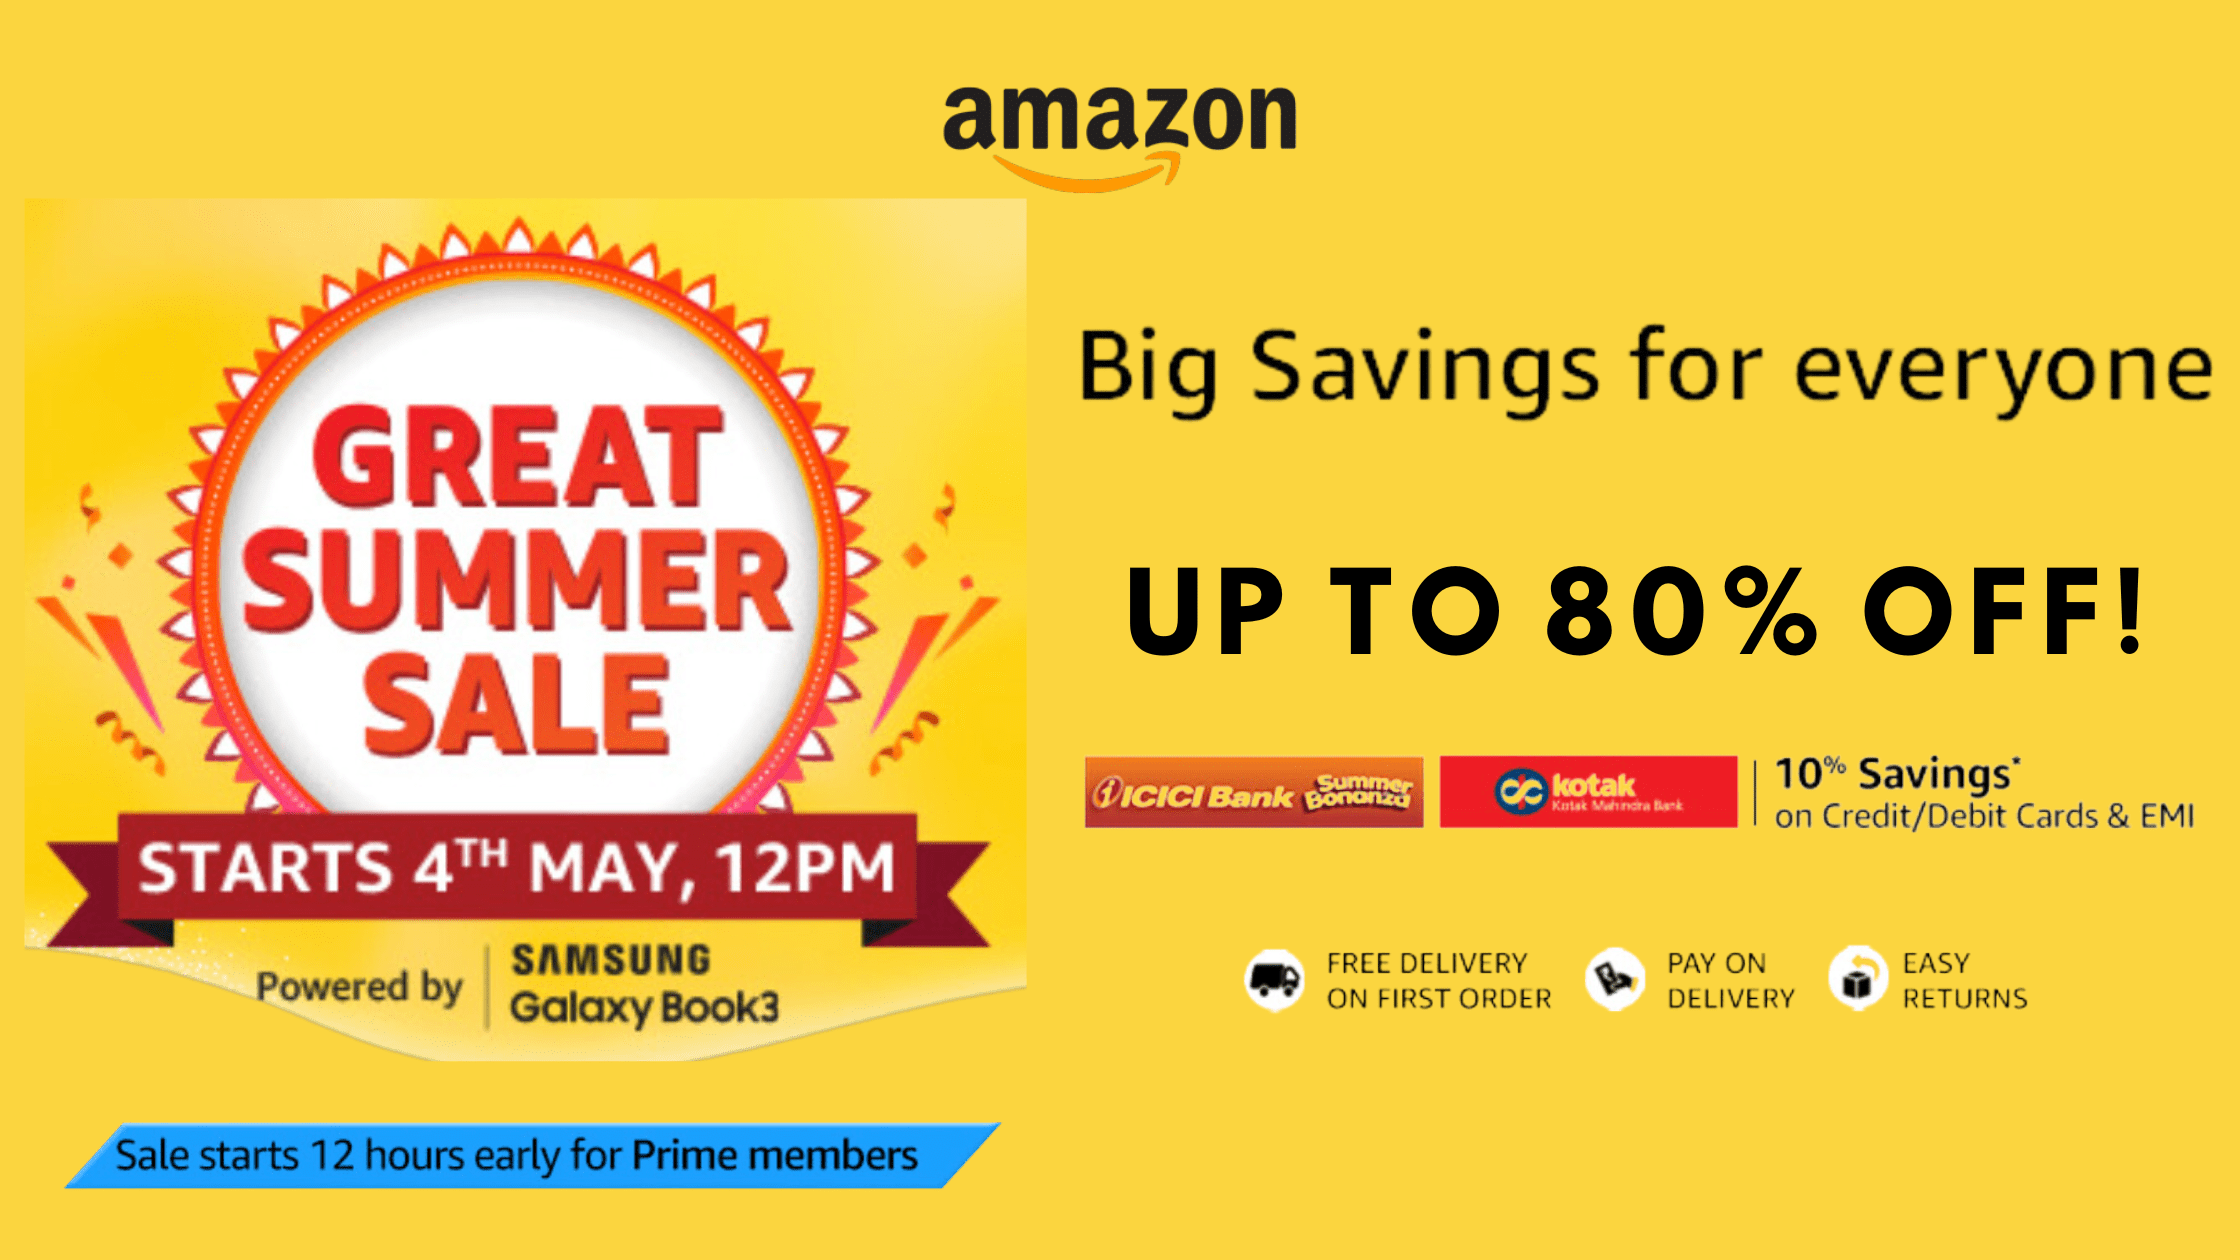 Amazon Great Summer Sale Starts on 4th May Up To 80 Off